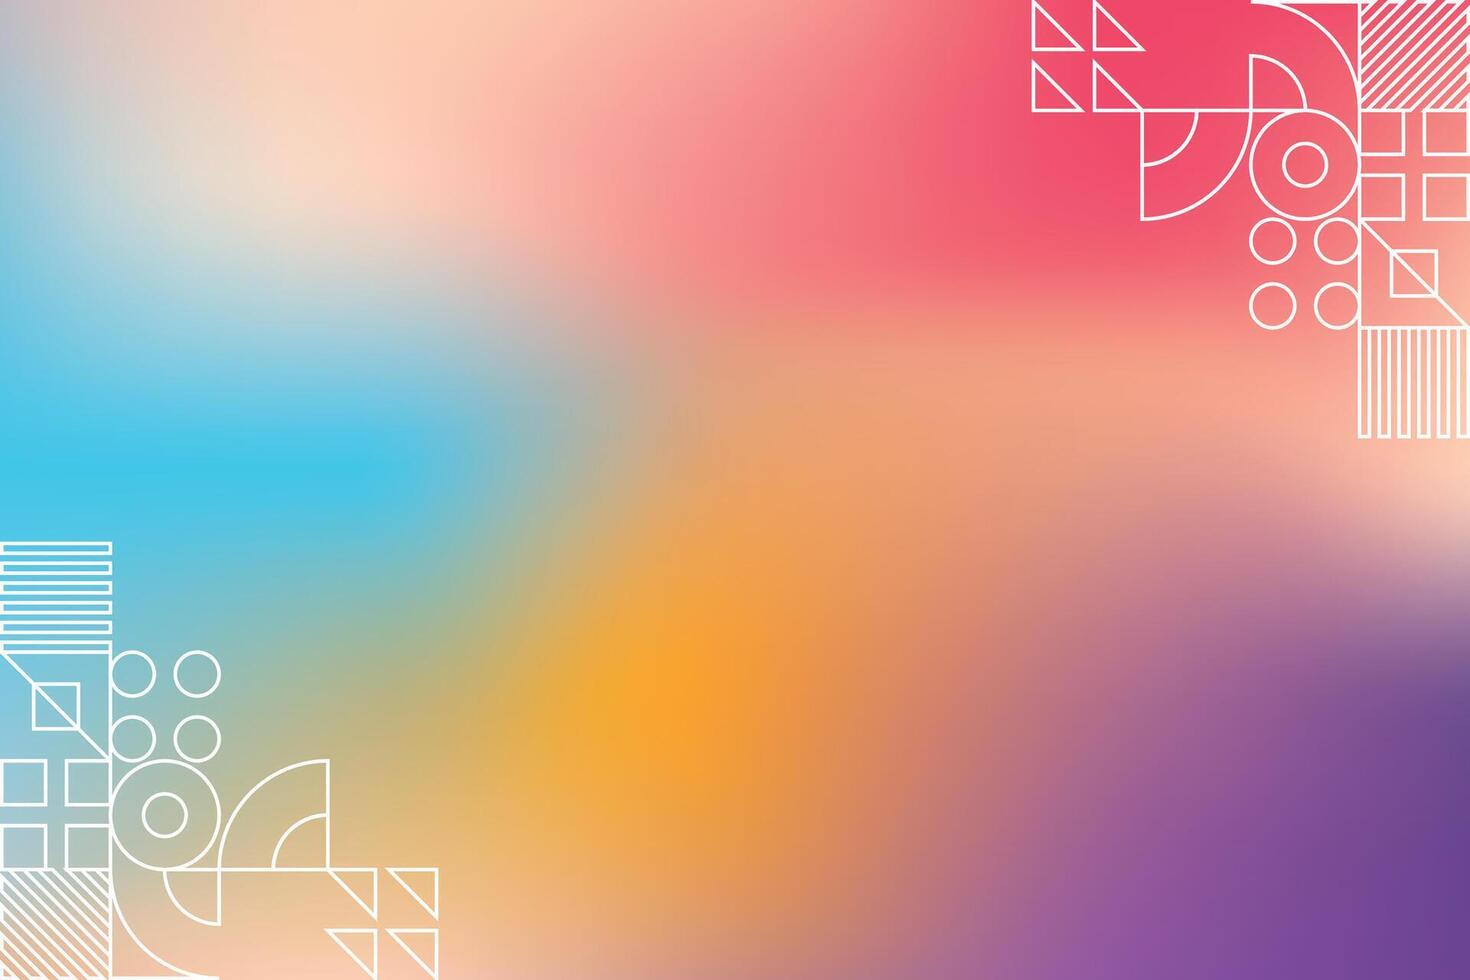 Vector graphic of gradient wallpaper, blurred colorful background, editable and resizable EPS 10